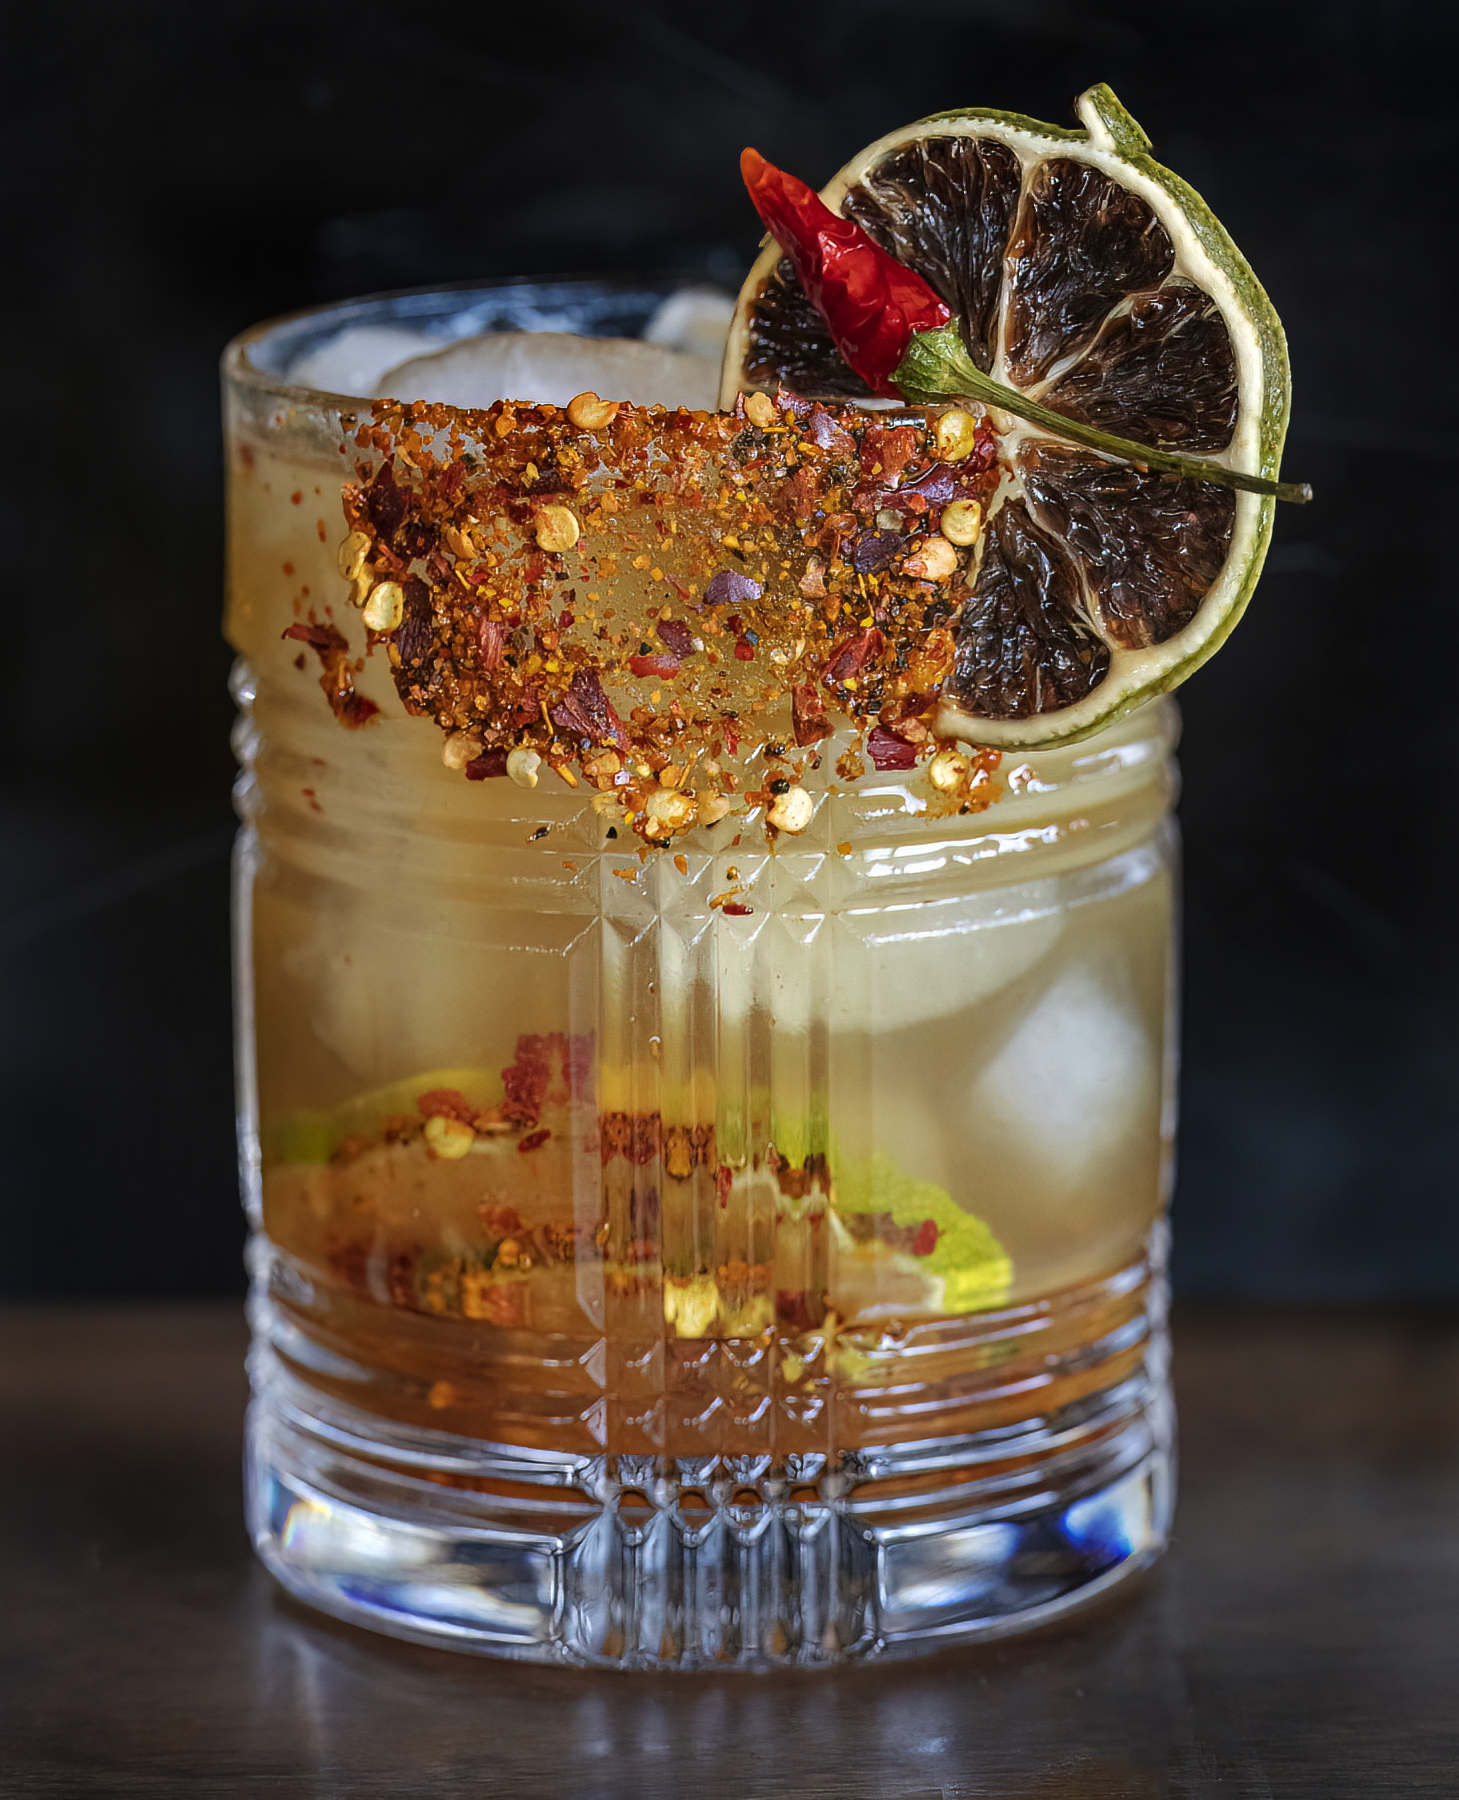 When you want to bring the heat to your usual bourbon neat. Crush the Thai red chili into the glass before drinking… if you dare. This whisky cocktail is served in the same Old Fashioned glassware that John Dutton and his family favor on the series Yellowstone.